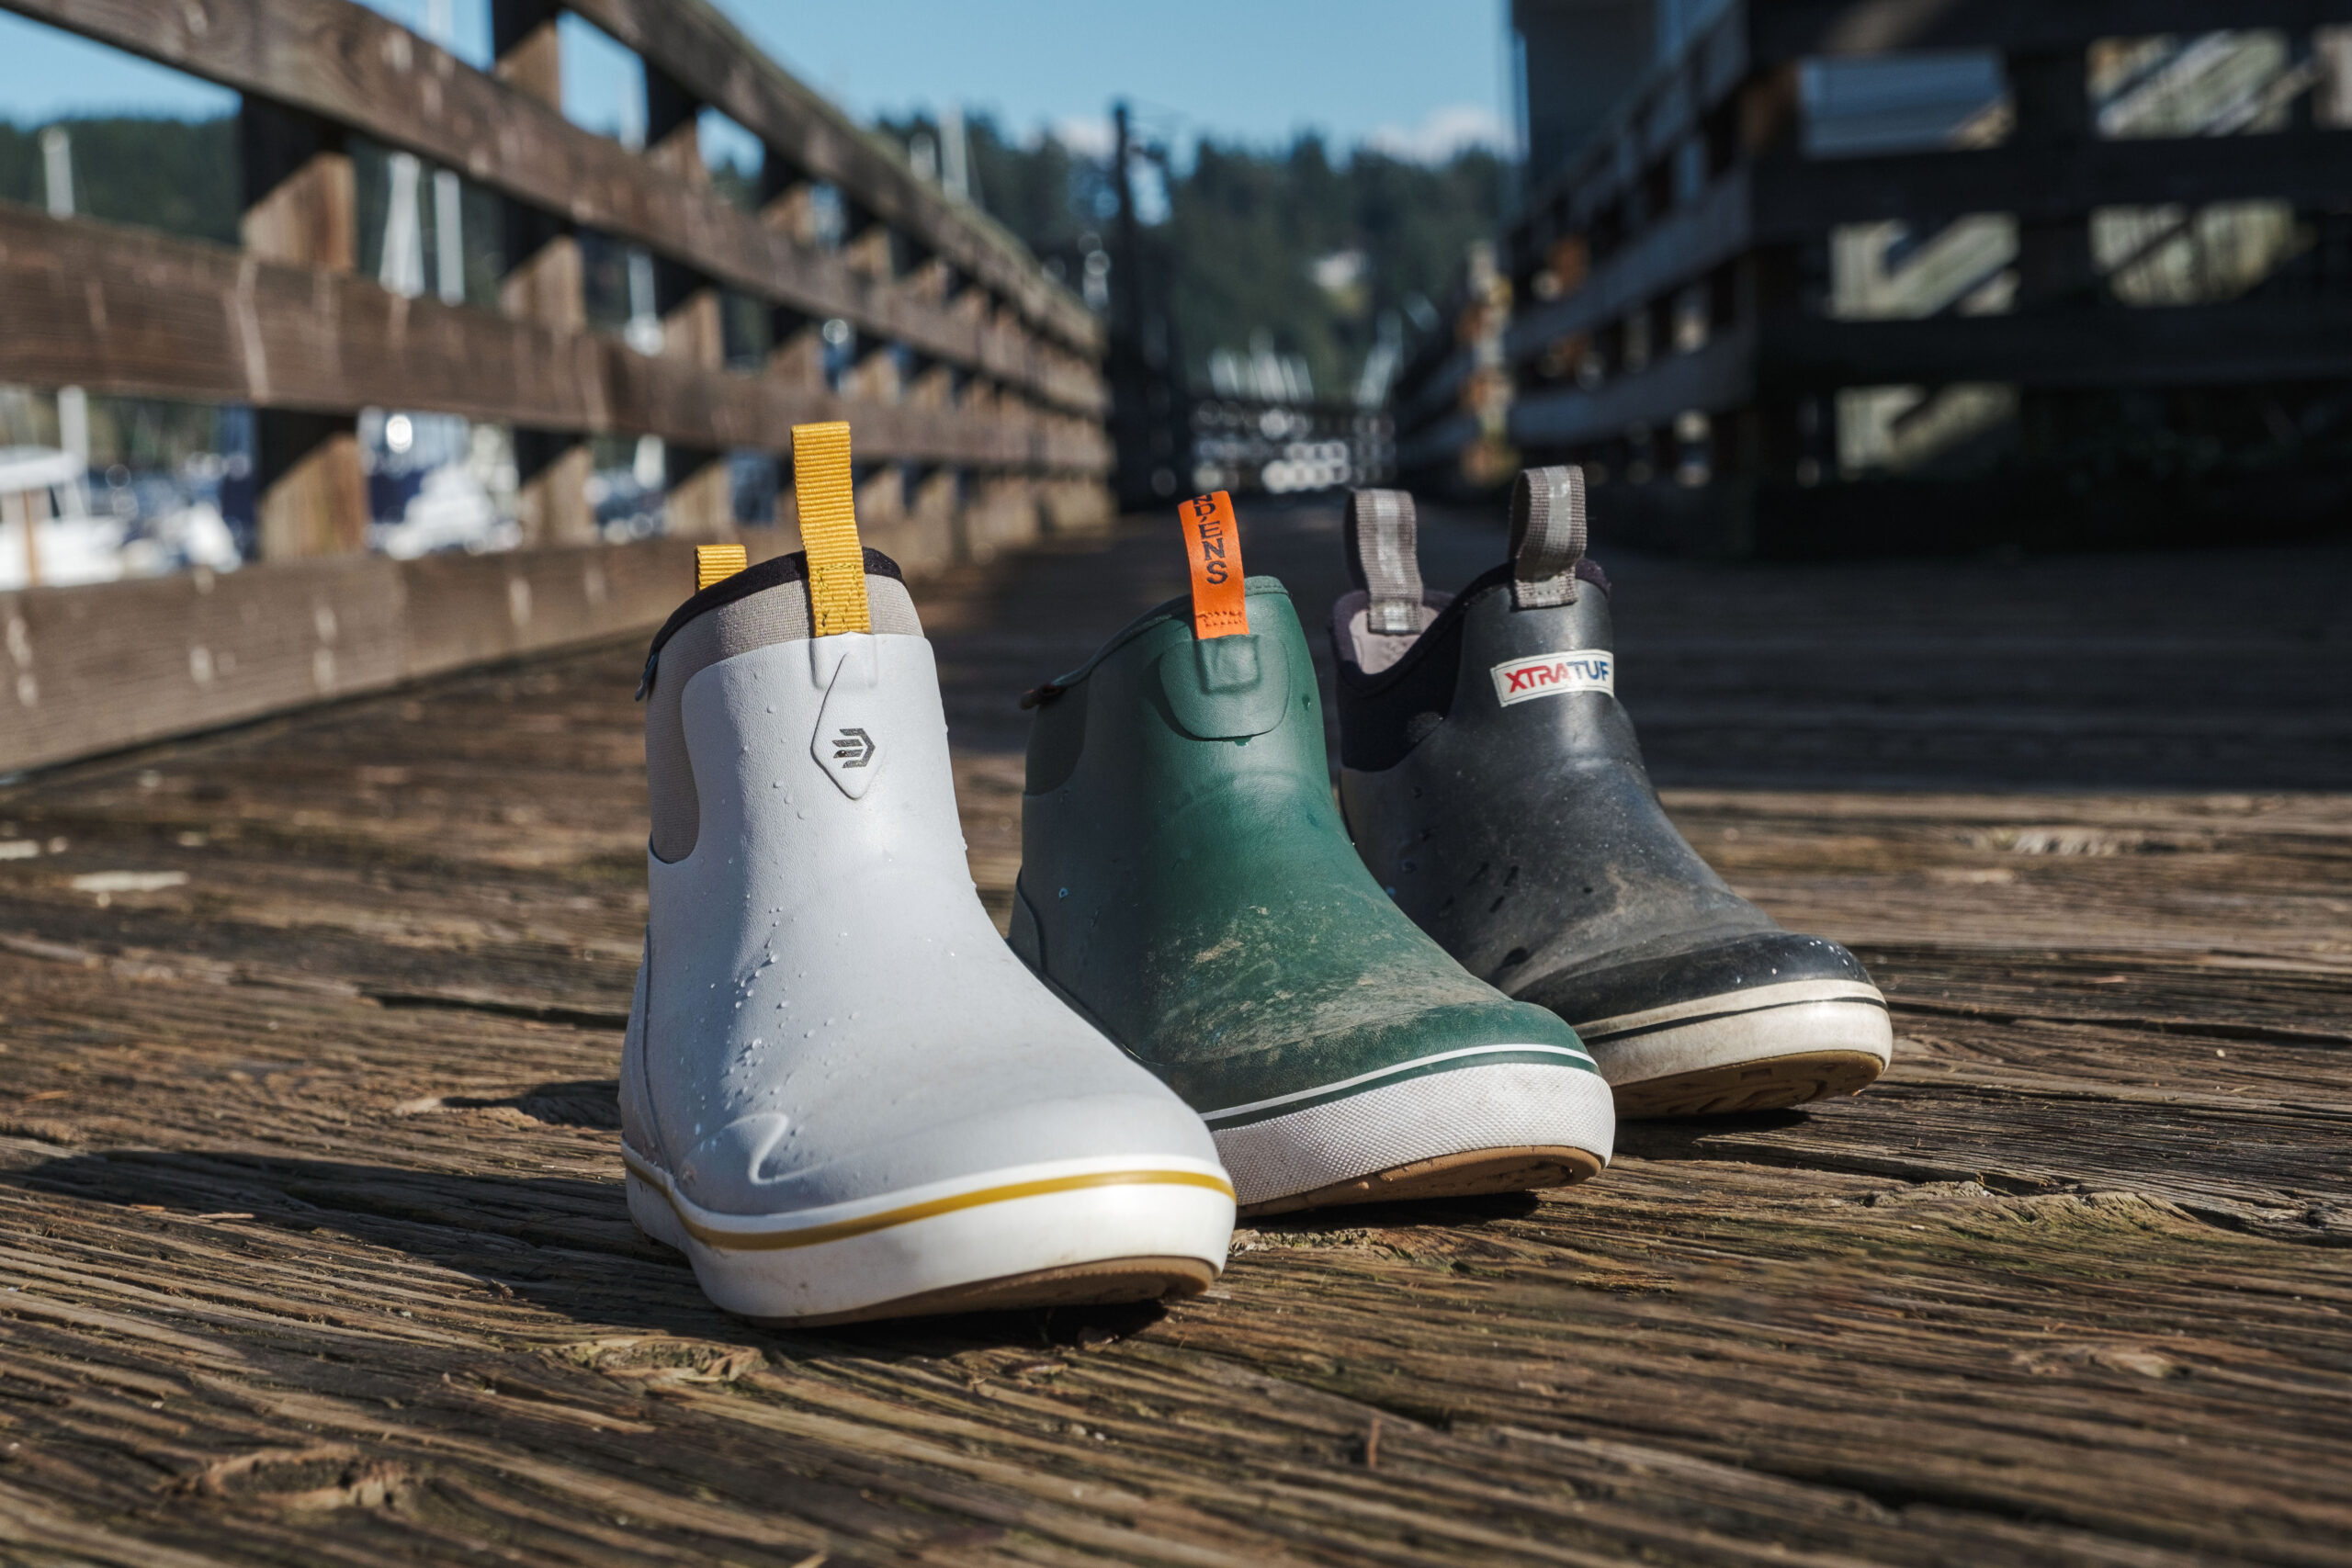 Three different deck boots from LaCrosse, Grundens, and Xtratuf lined up on a wood deck.